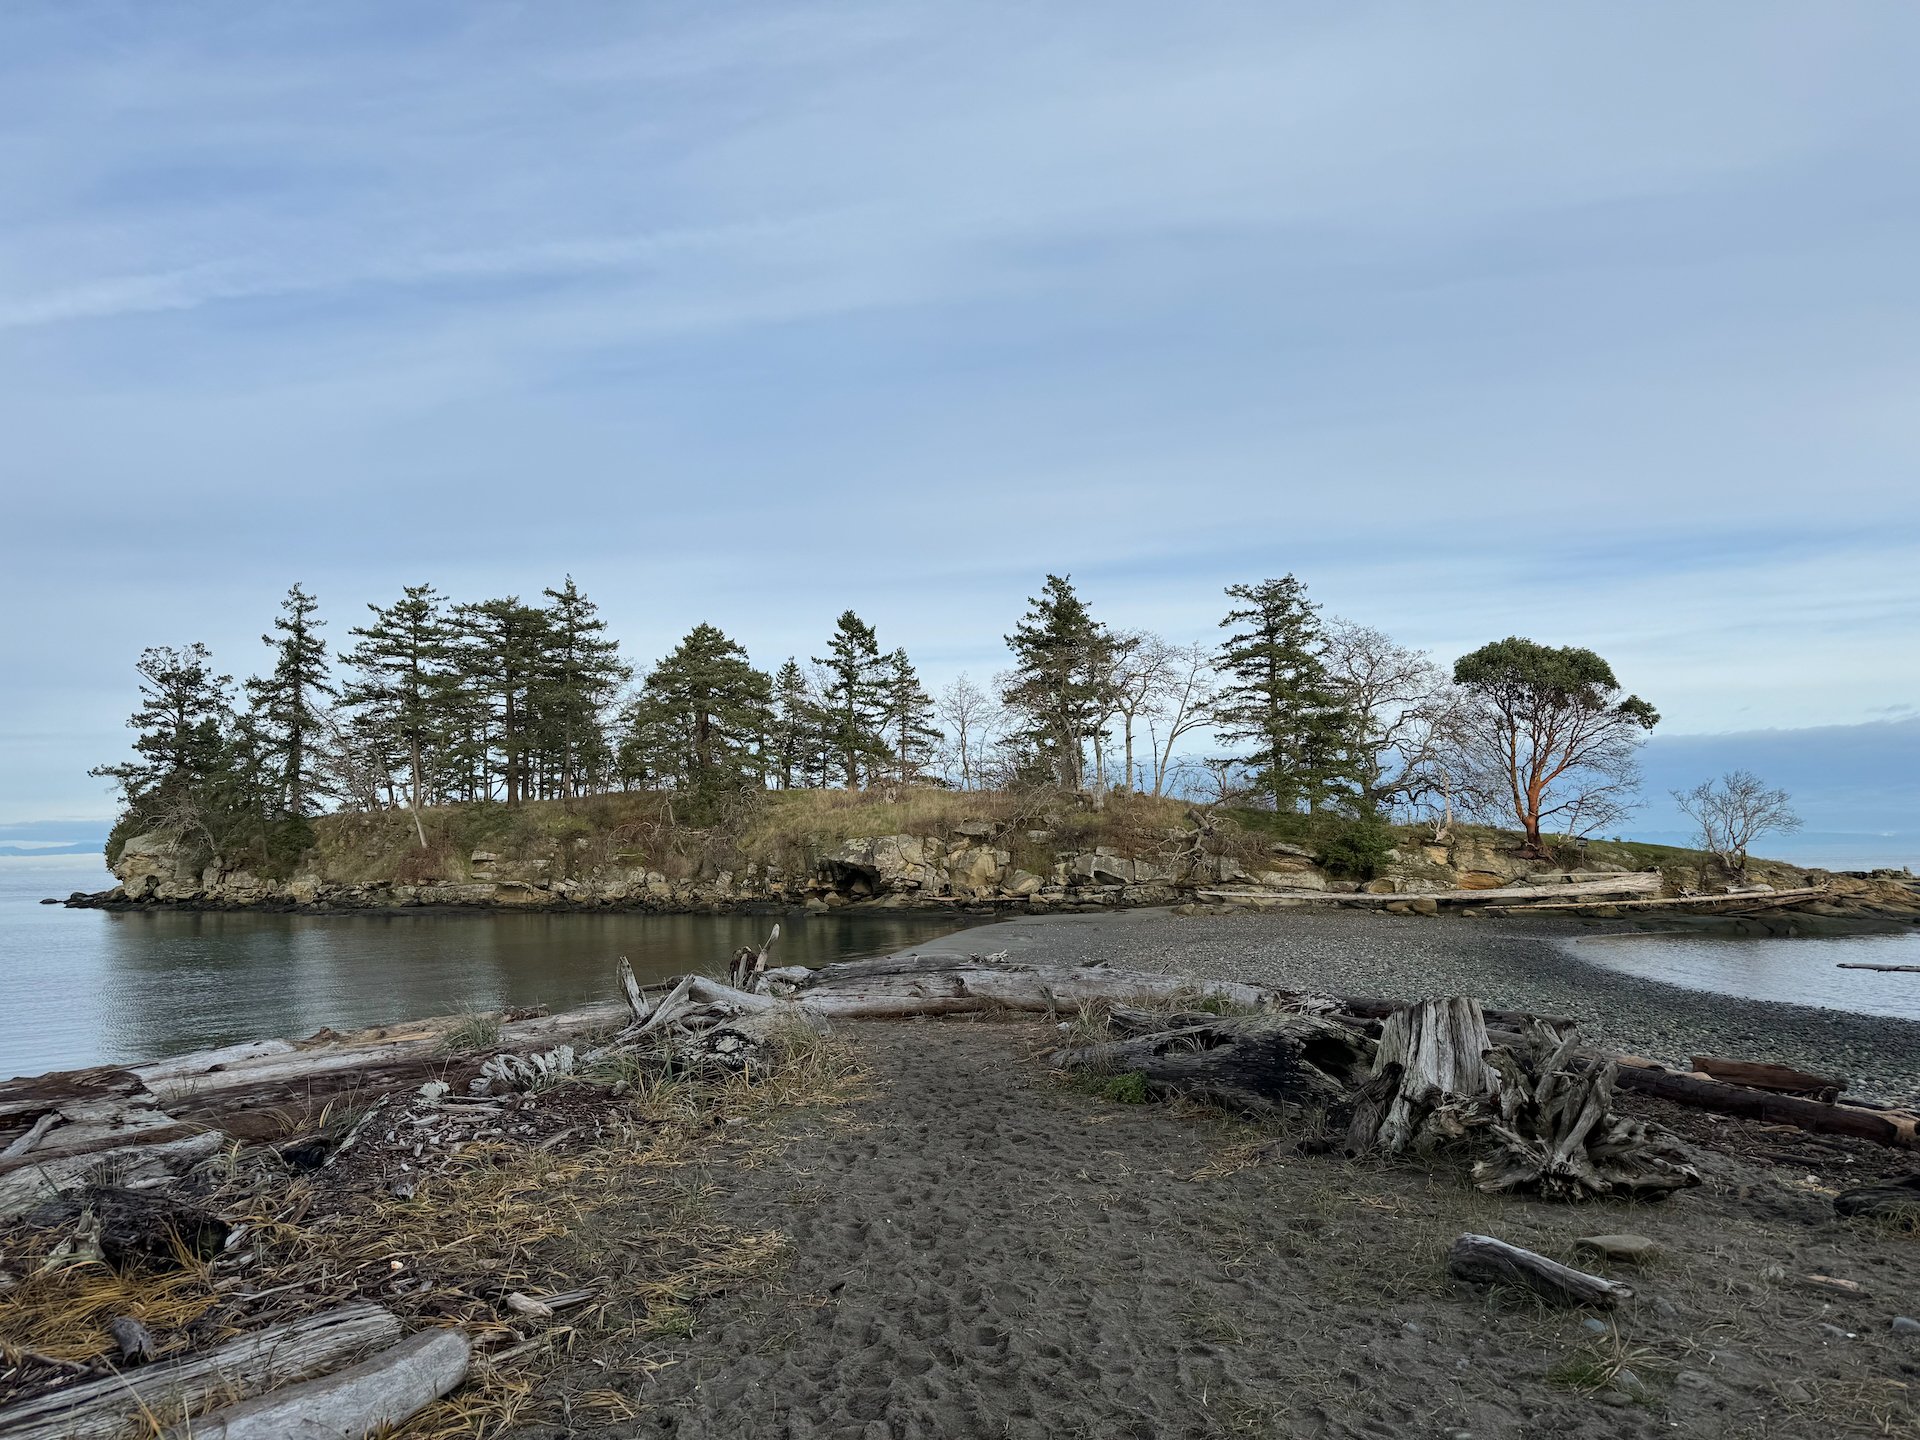  After coming back from lunch, the tide had gone out and the “island” had reconnected to the beach. That let us walk out and explore the island. 